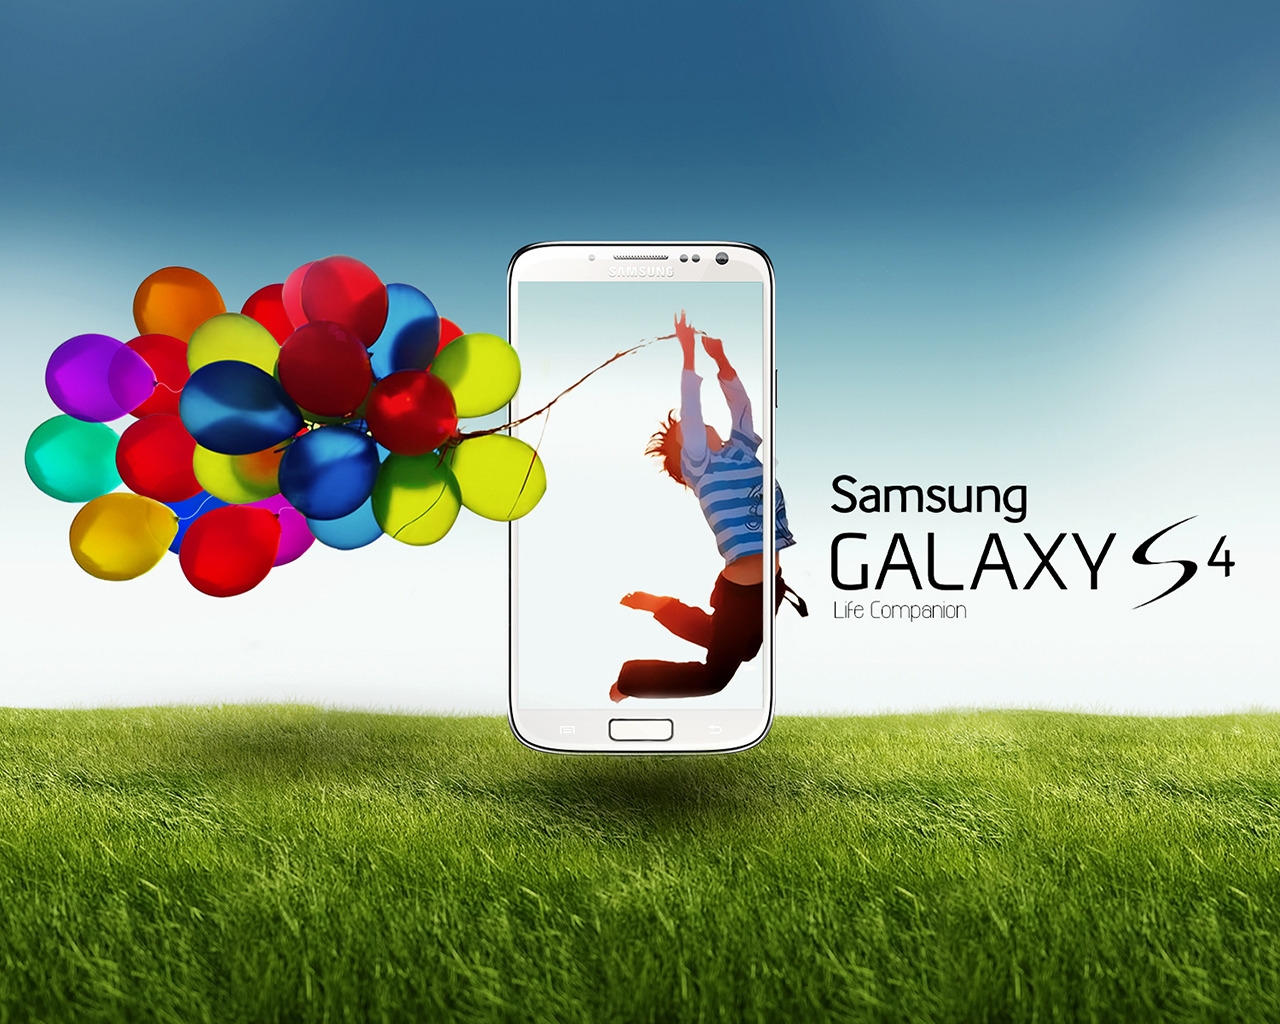 New Samsung Galaxy S4 for 1280 x 1024 resolution